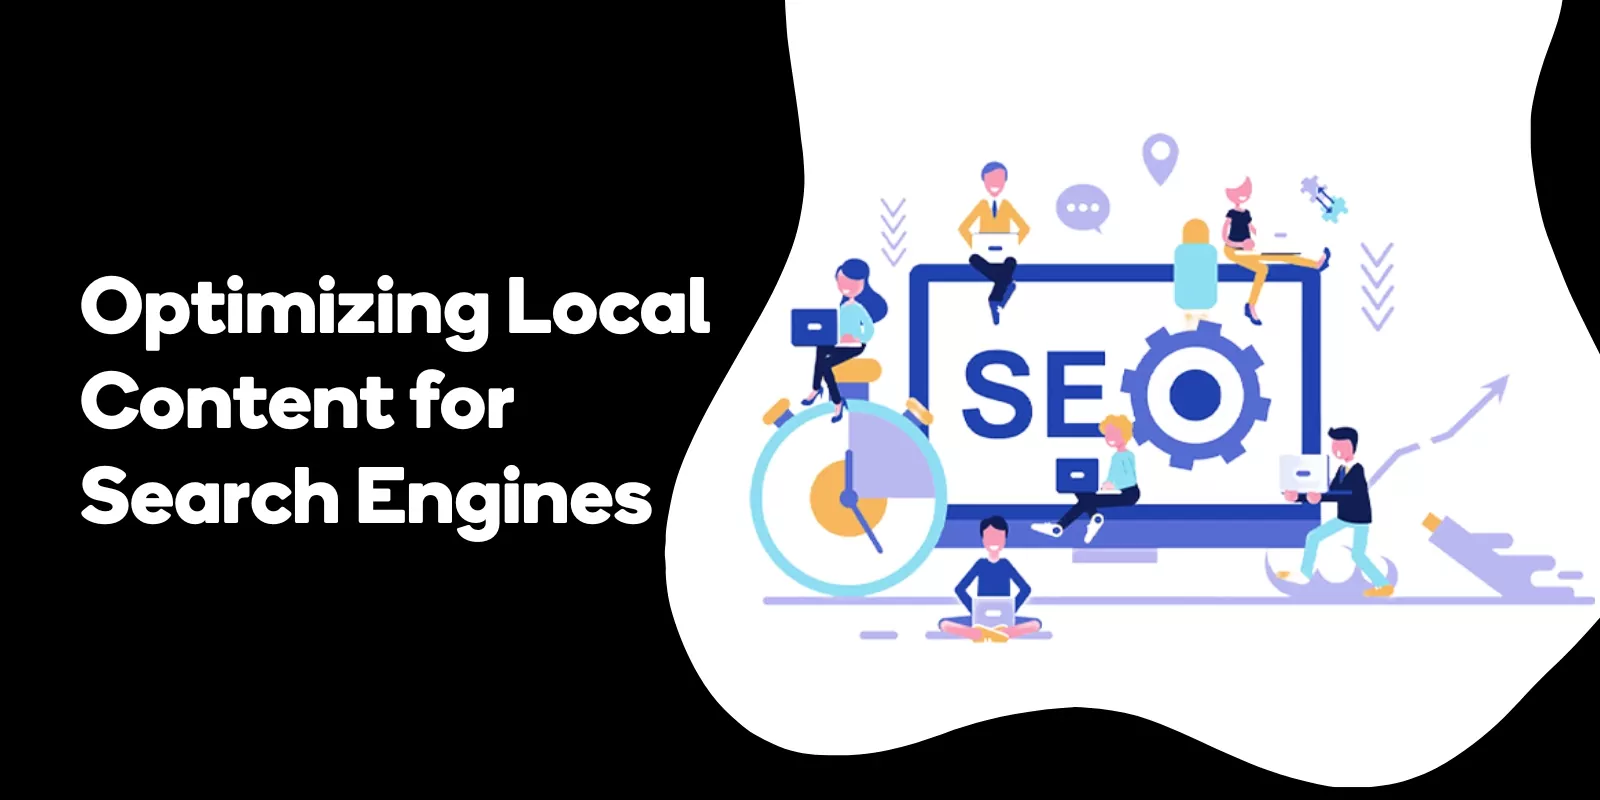 Optimizing Local Content for Search Engines